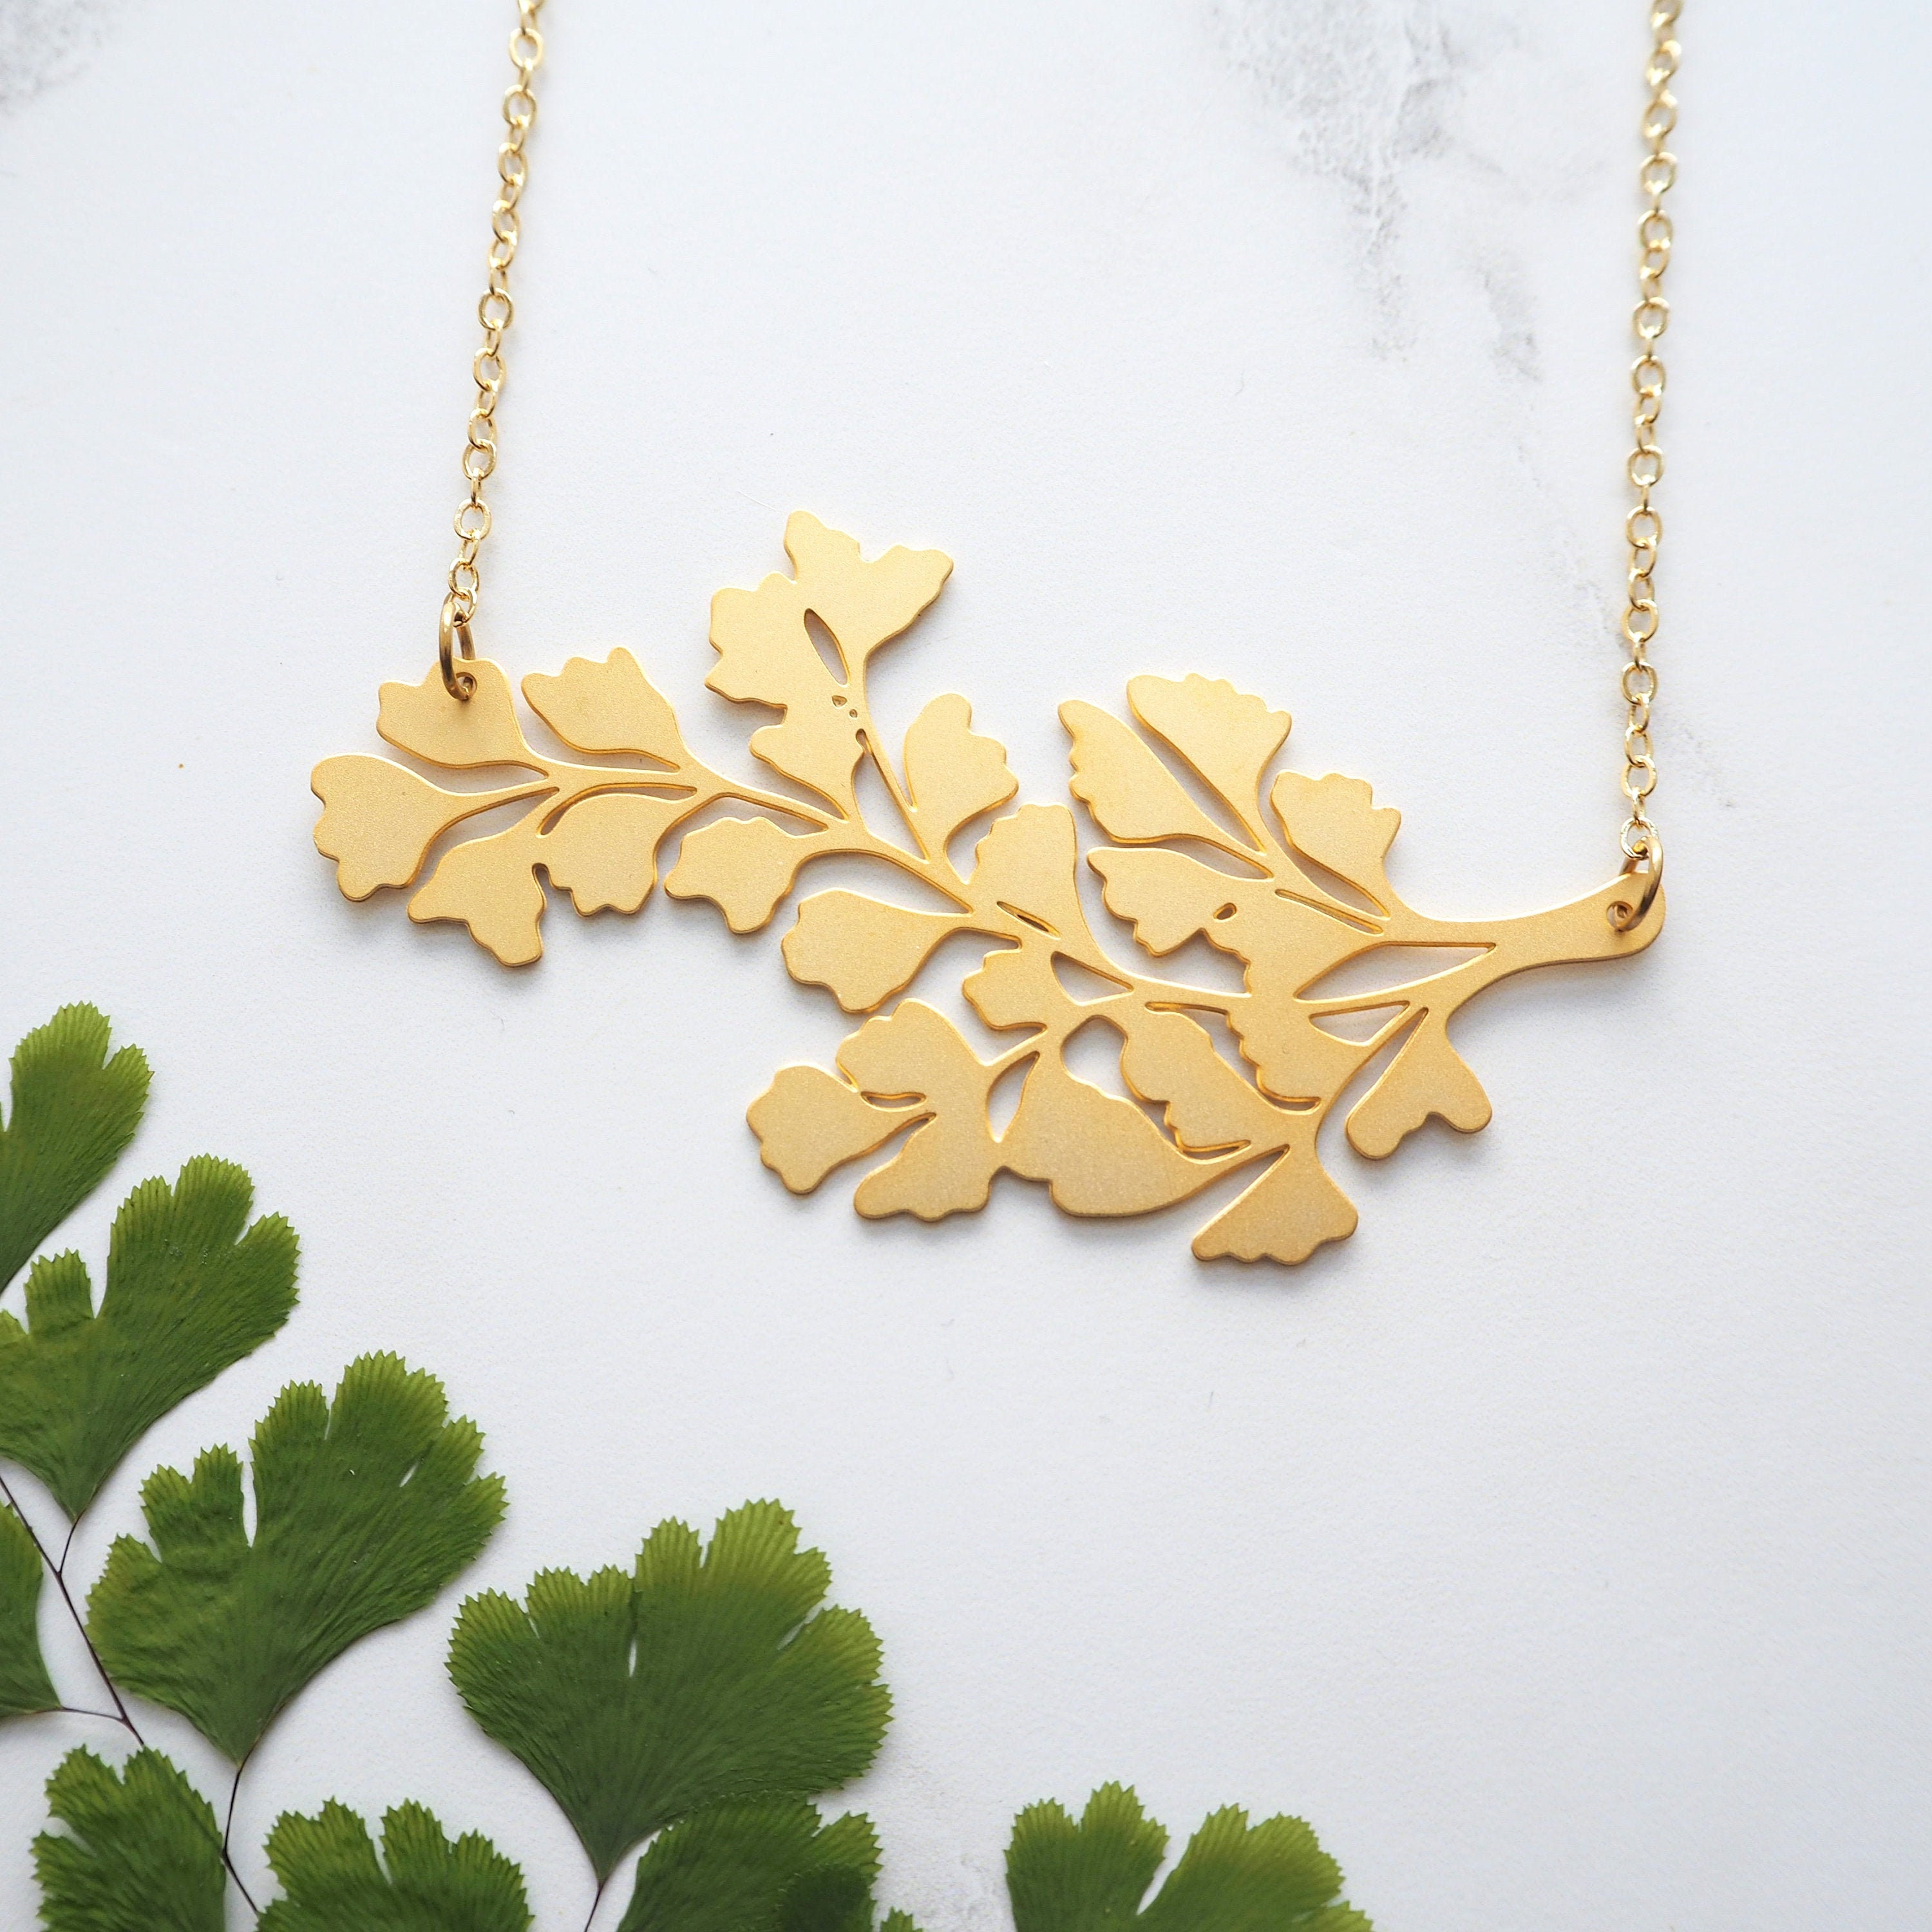 Maidenhair Fern Statement Necklace - Gold Leaf Pendant Jewellery Plant Gift For Her